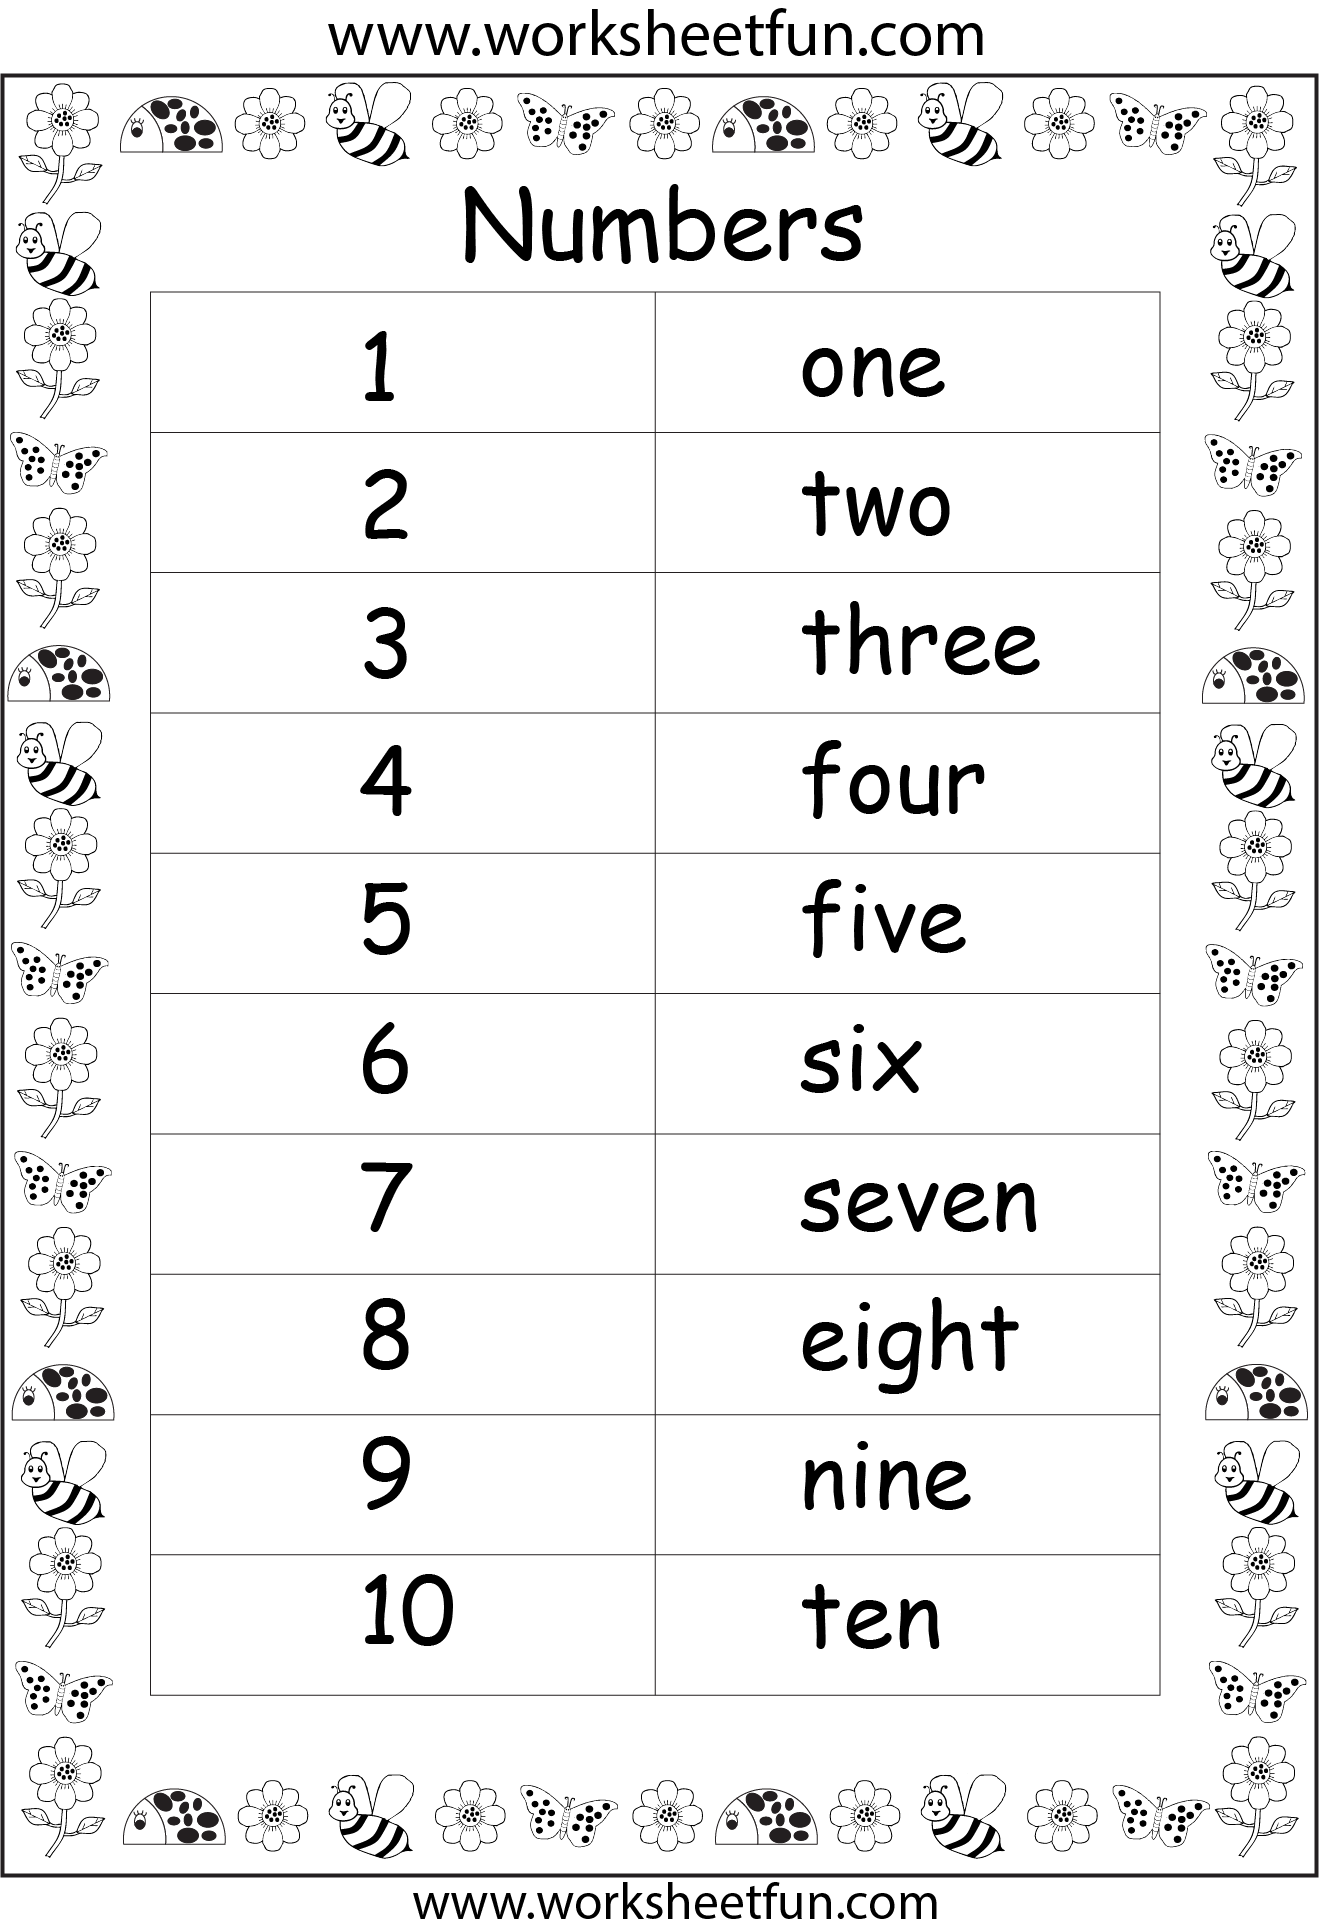 7-best-images-of-printable-number-words-worksheets-writing-number-words-worksheets-first-grade